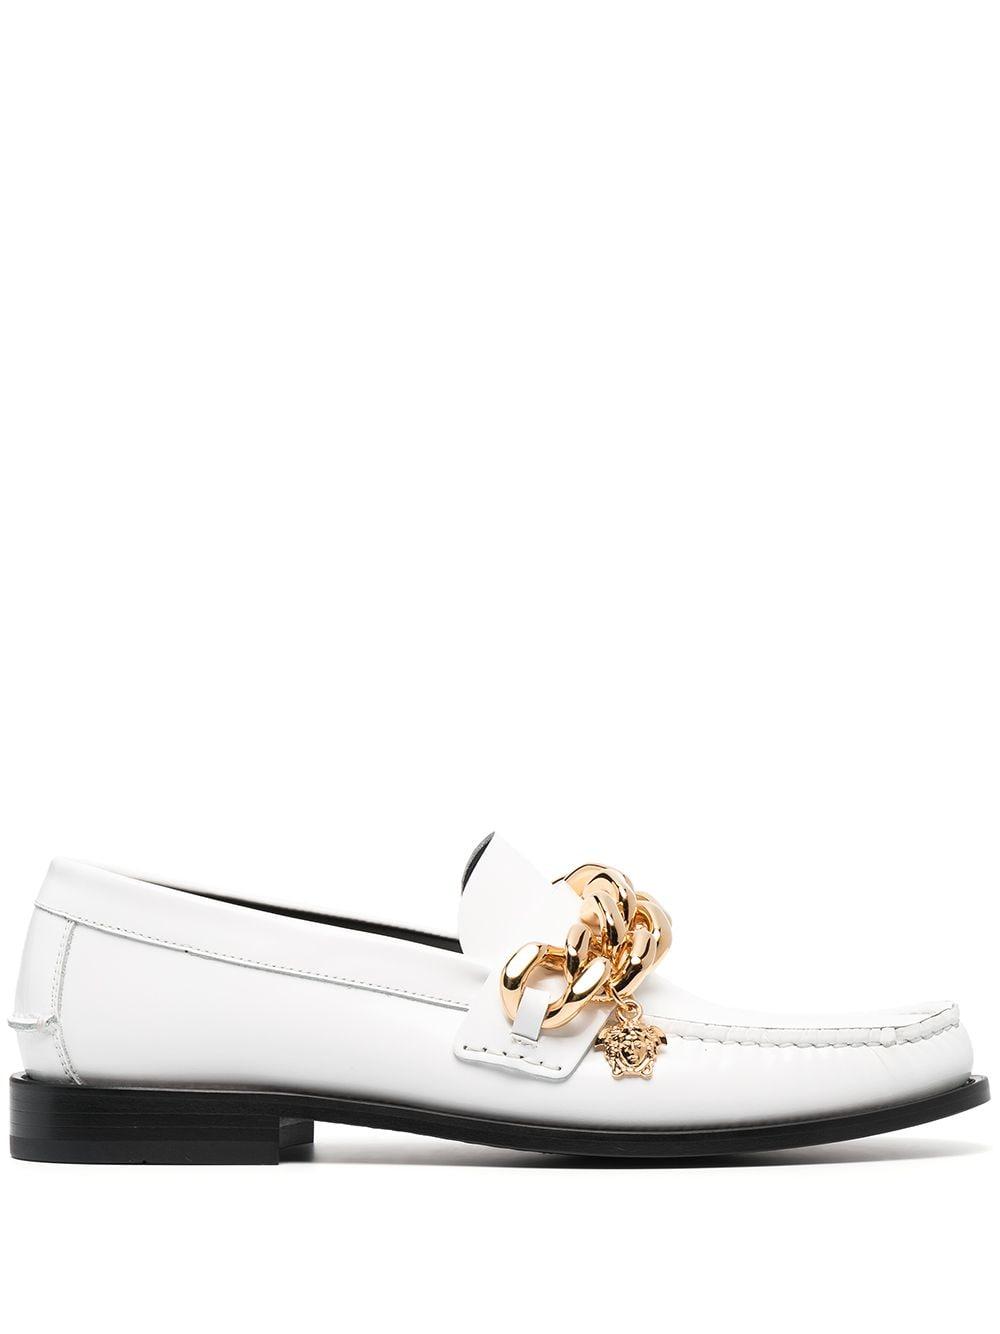 Versace Leather Chain-link Detail Loafers in White for Men - Lyst